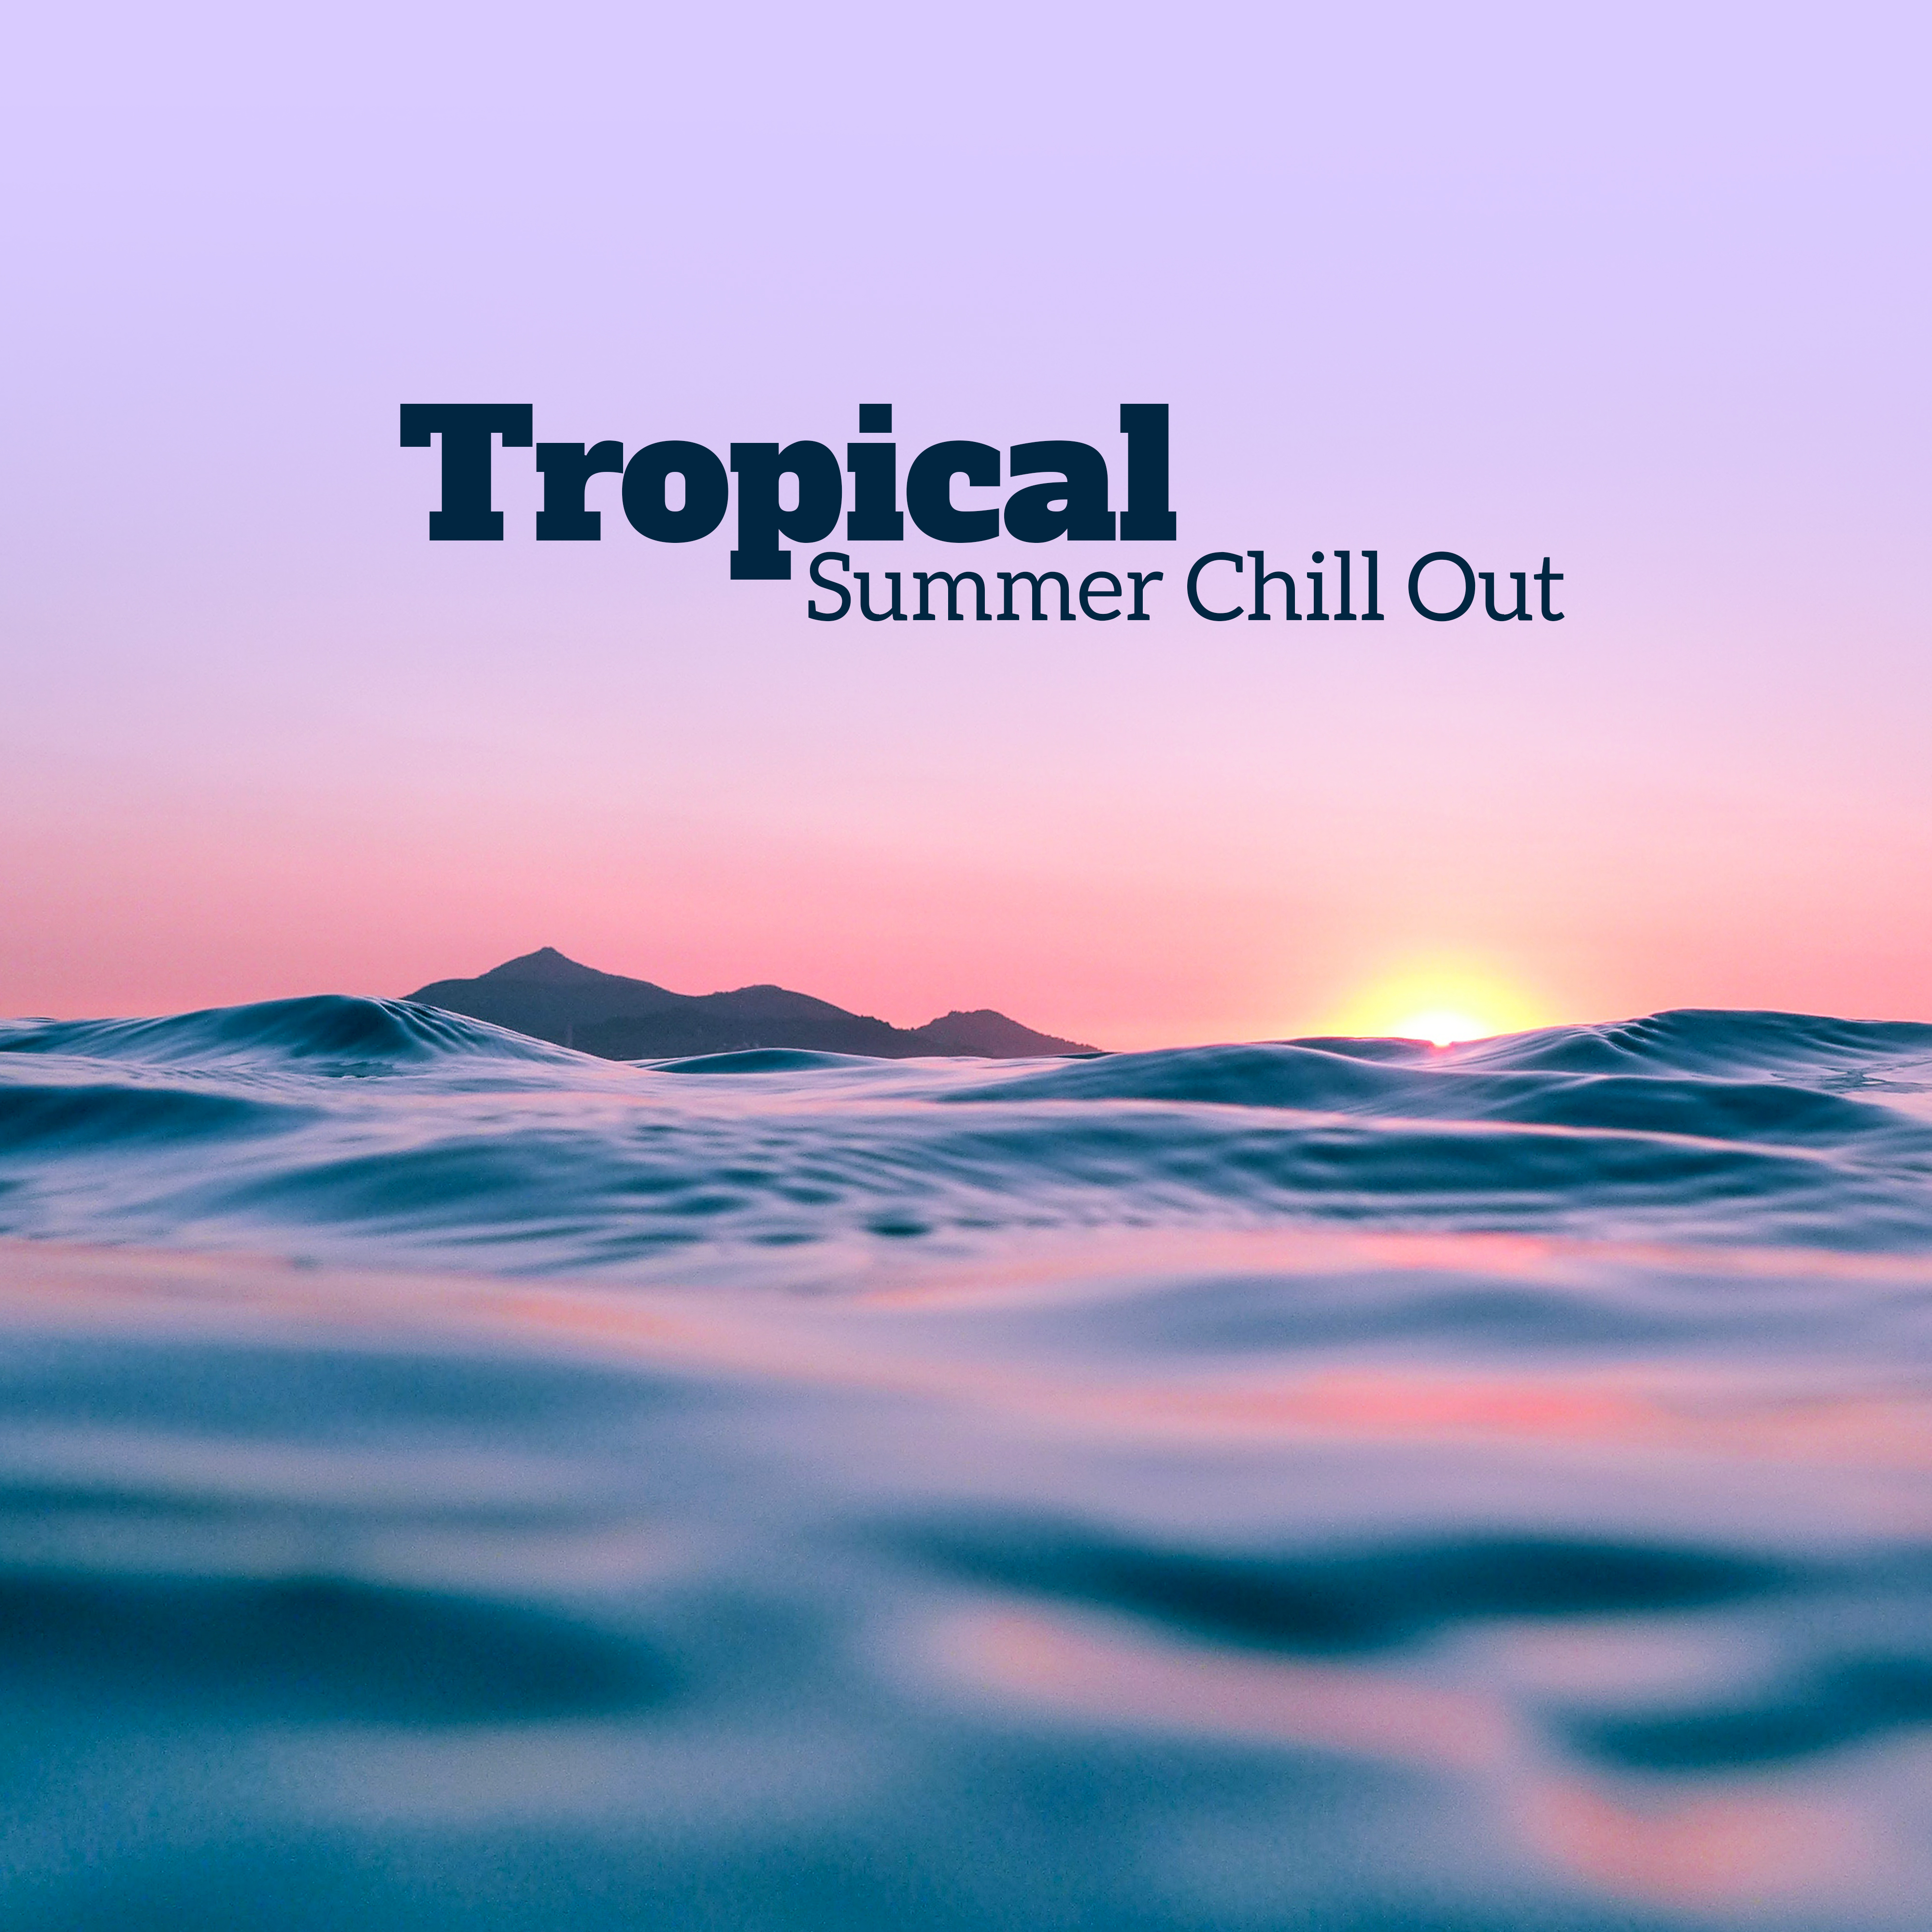 Tropical Summer Chill Out